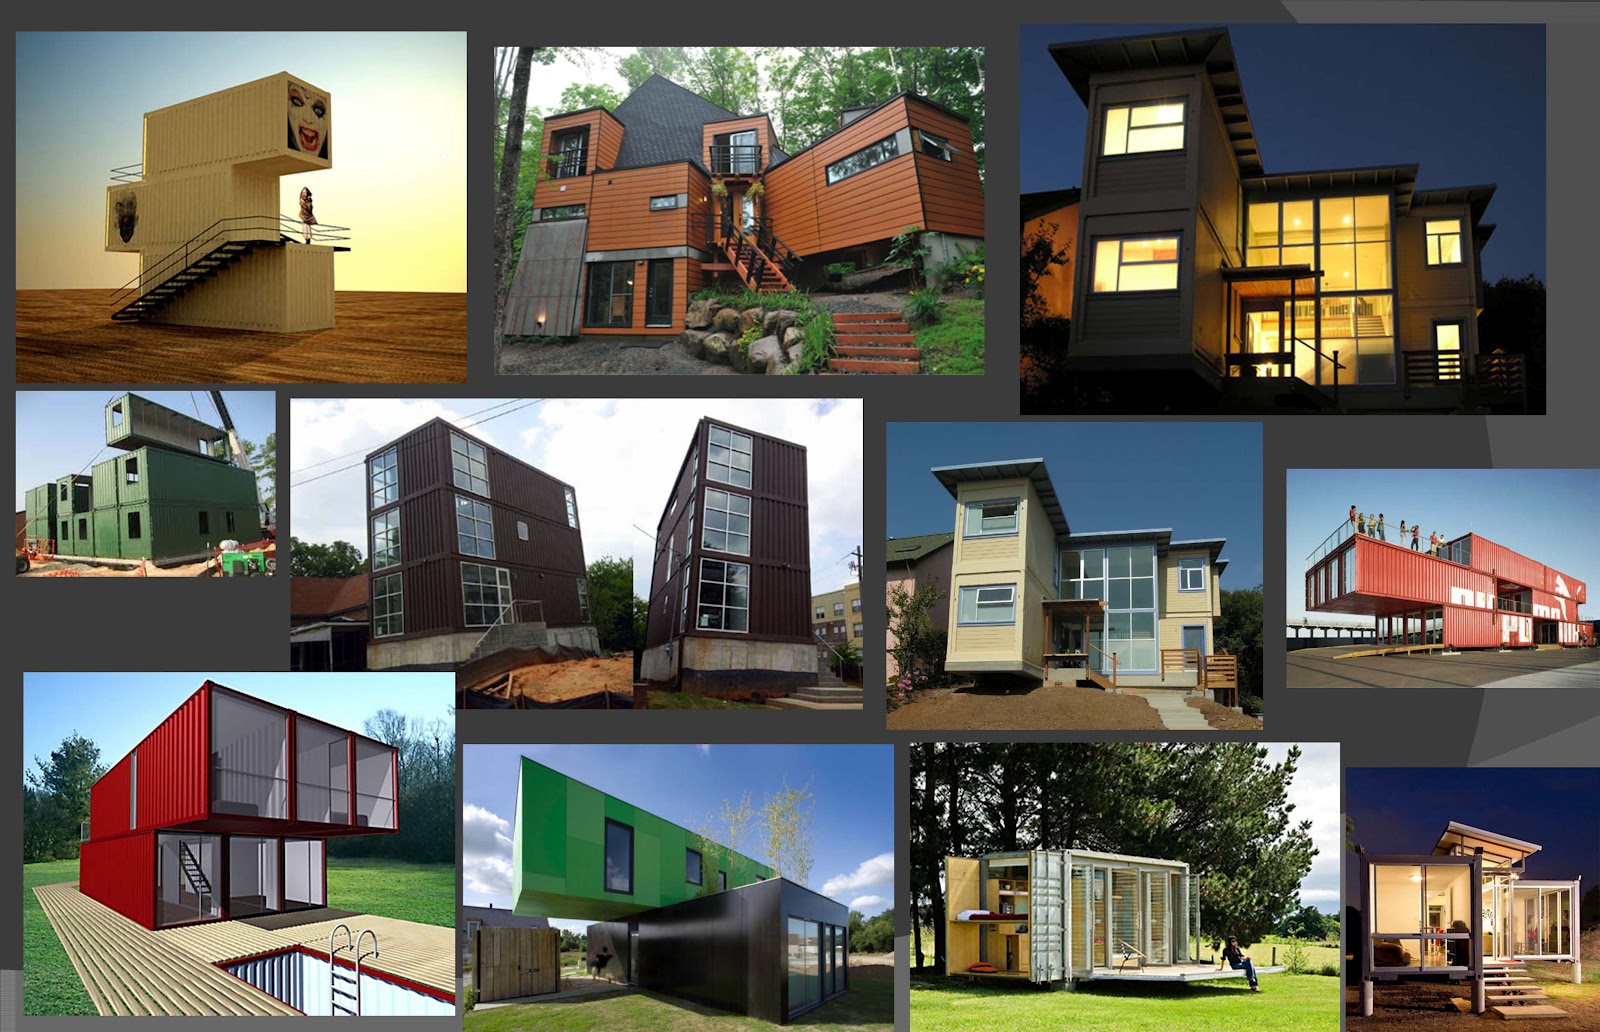 ARCH3511 Design V Fall 2012: Board #1 container home style